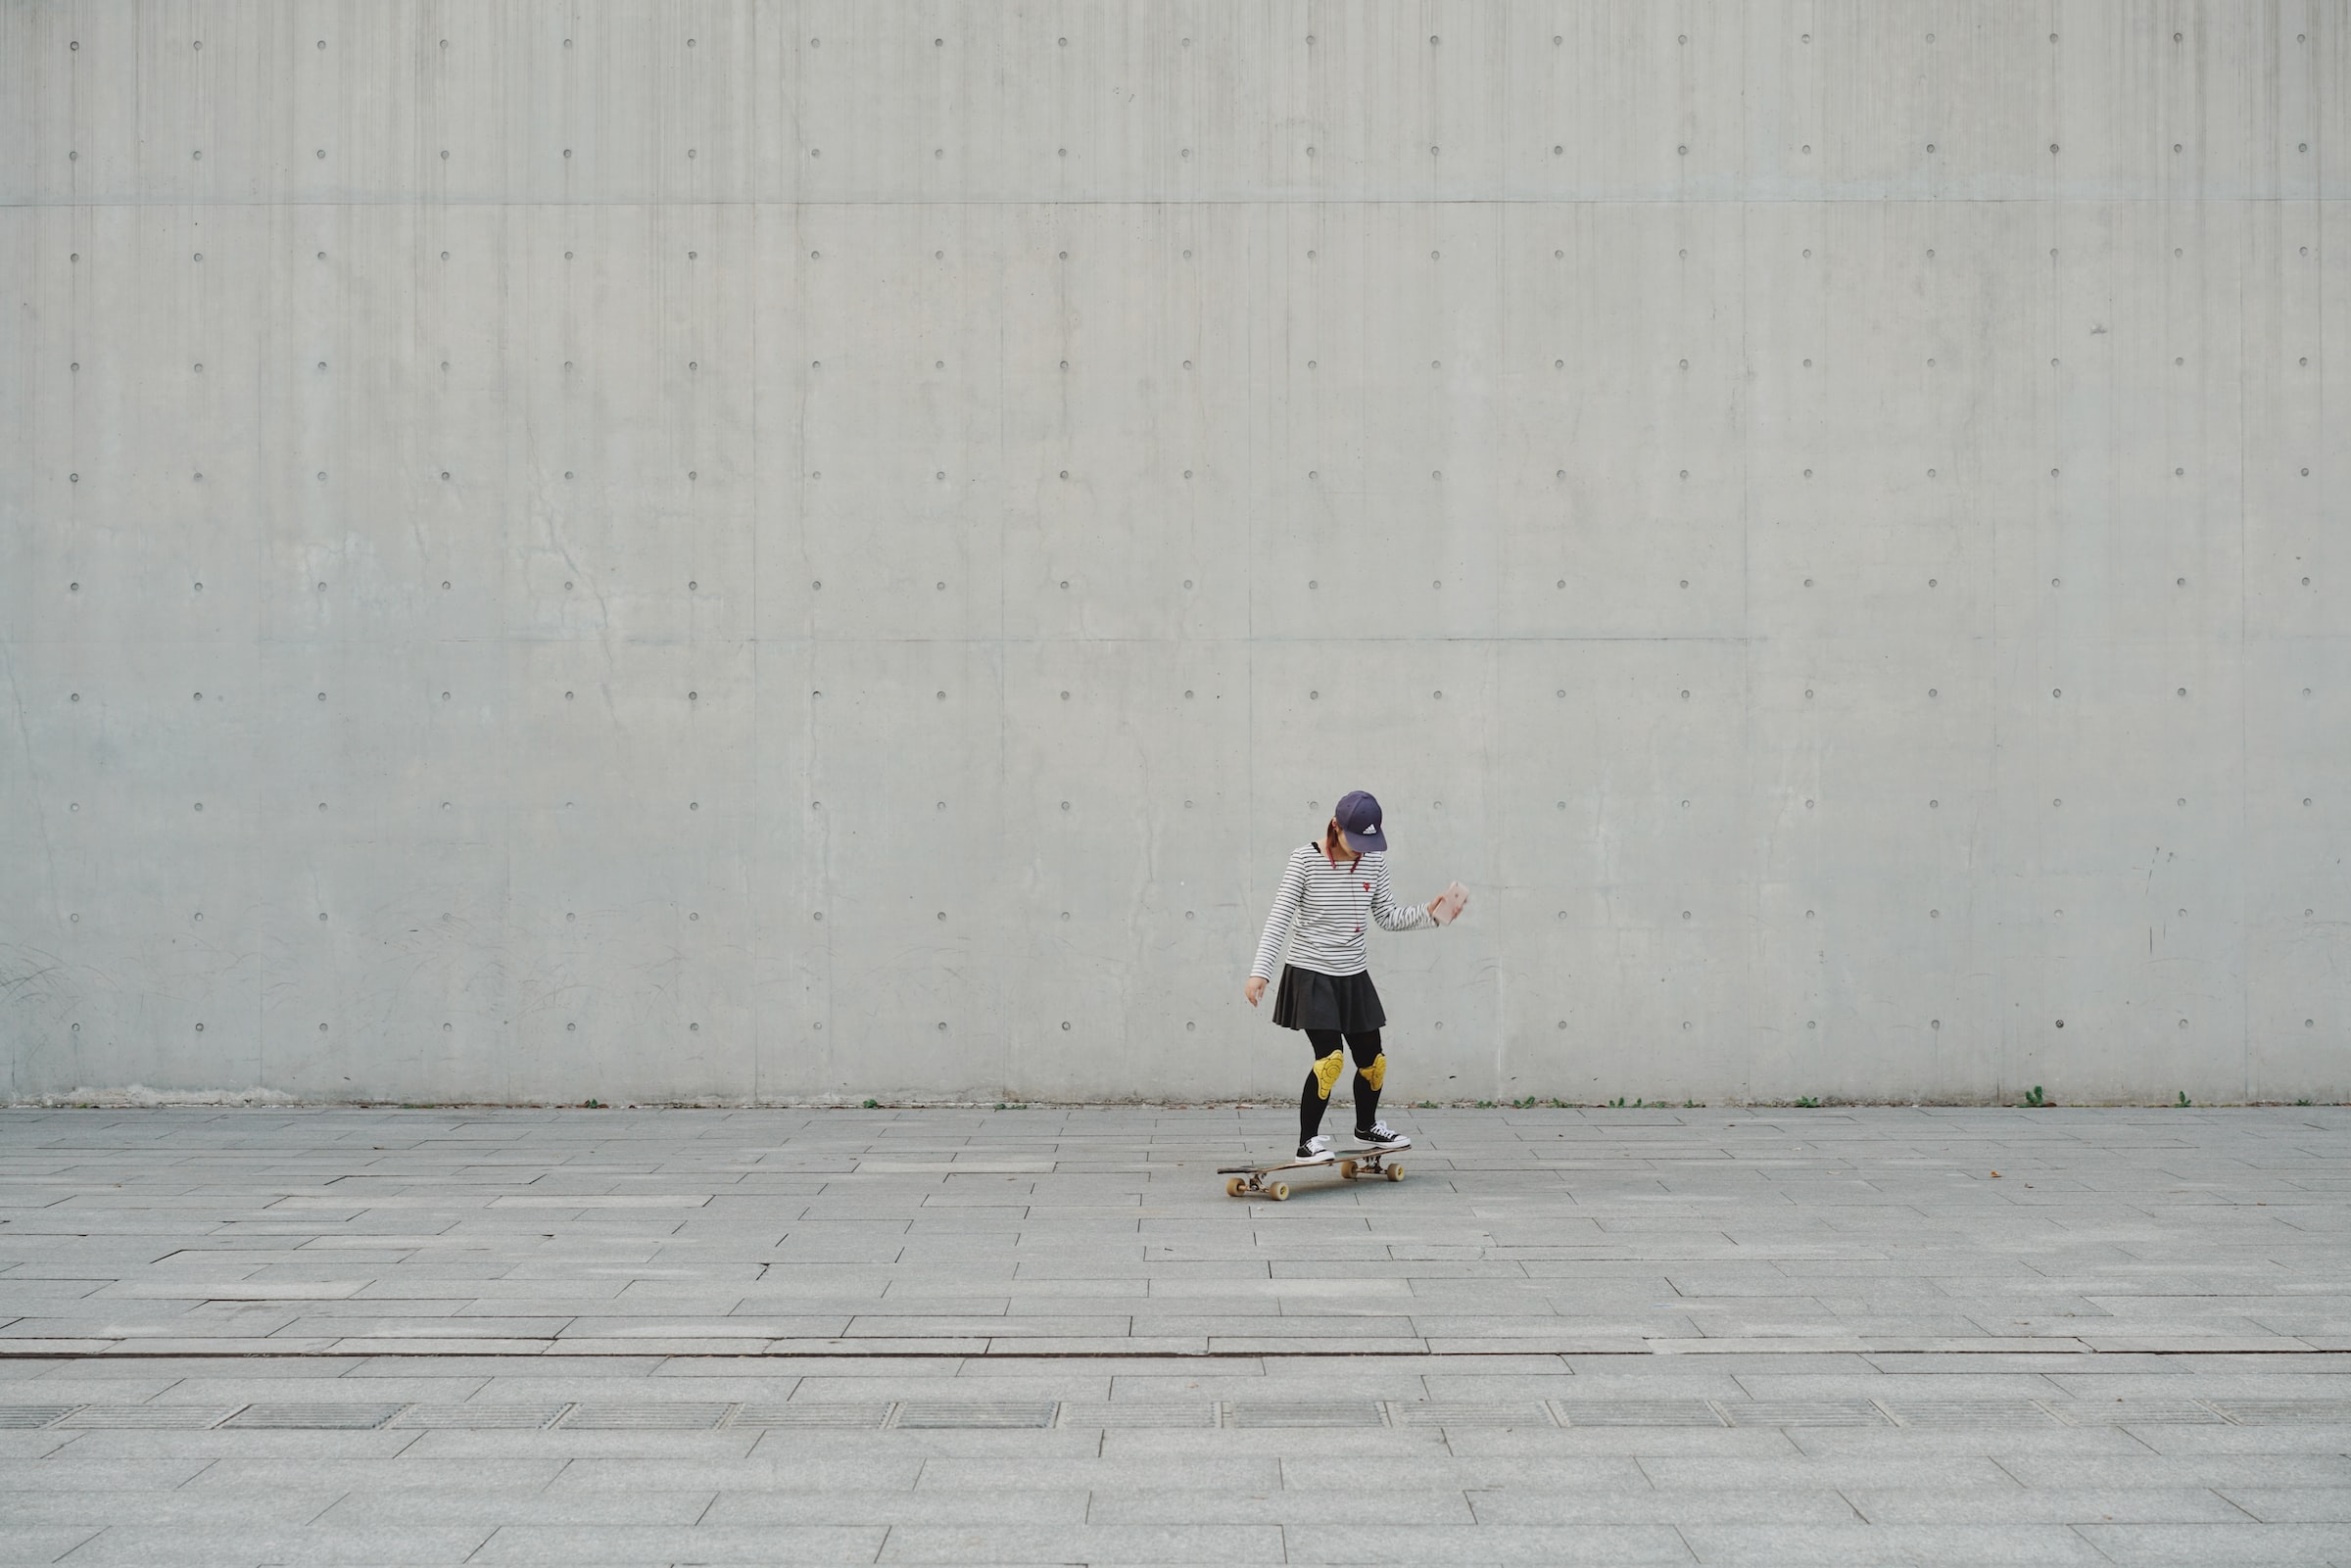 A child skateboards on concrete ground, with a concrete wall in the background